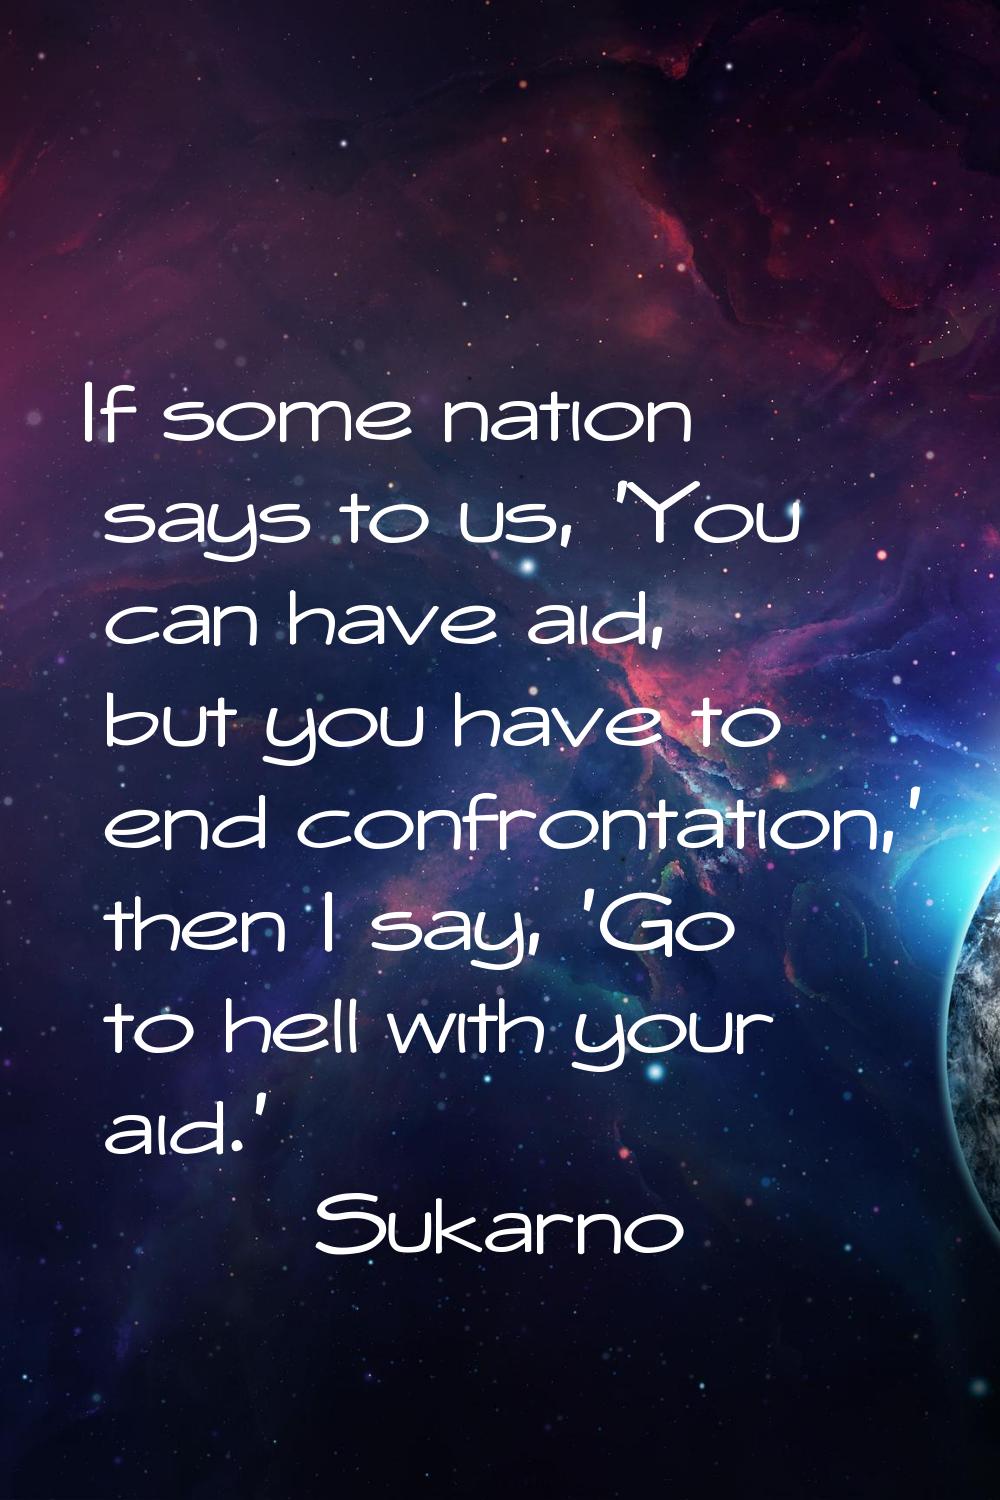 If some nation says to us, 'You can have aid, but you have to end confrontation,' then I say, 'Go t